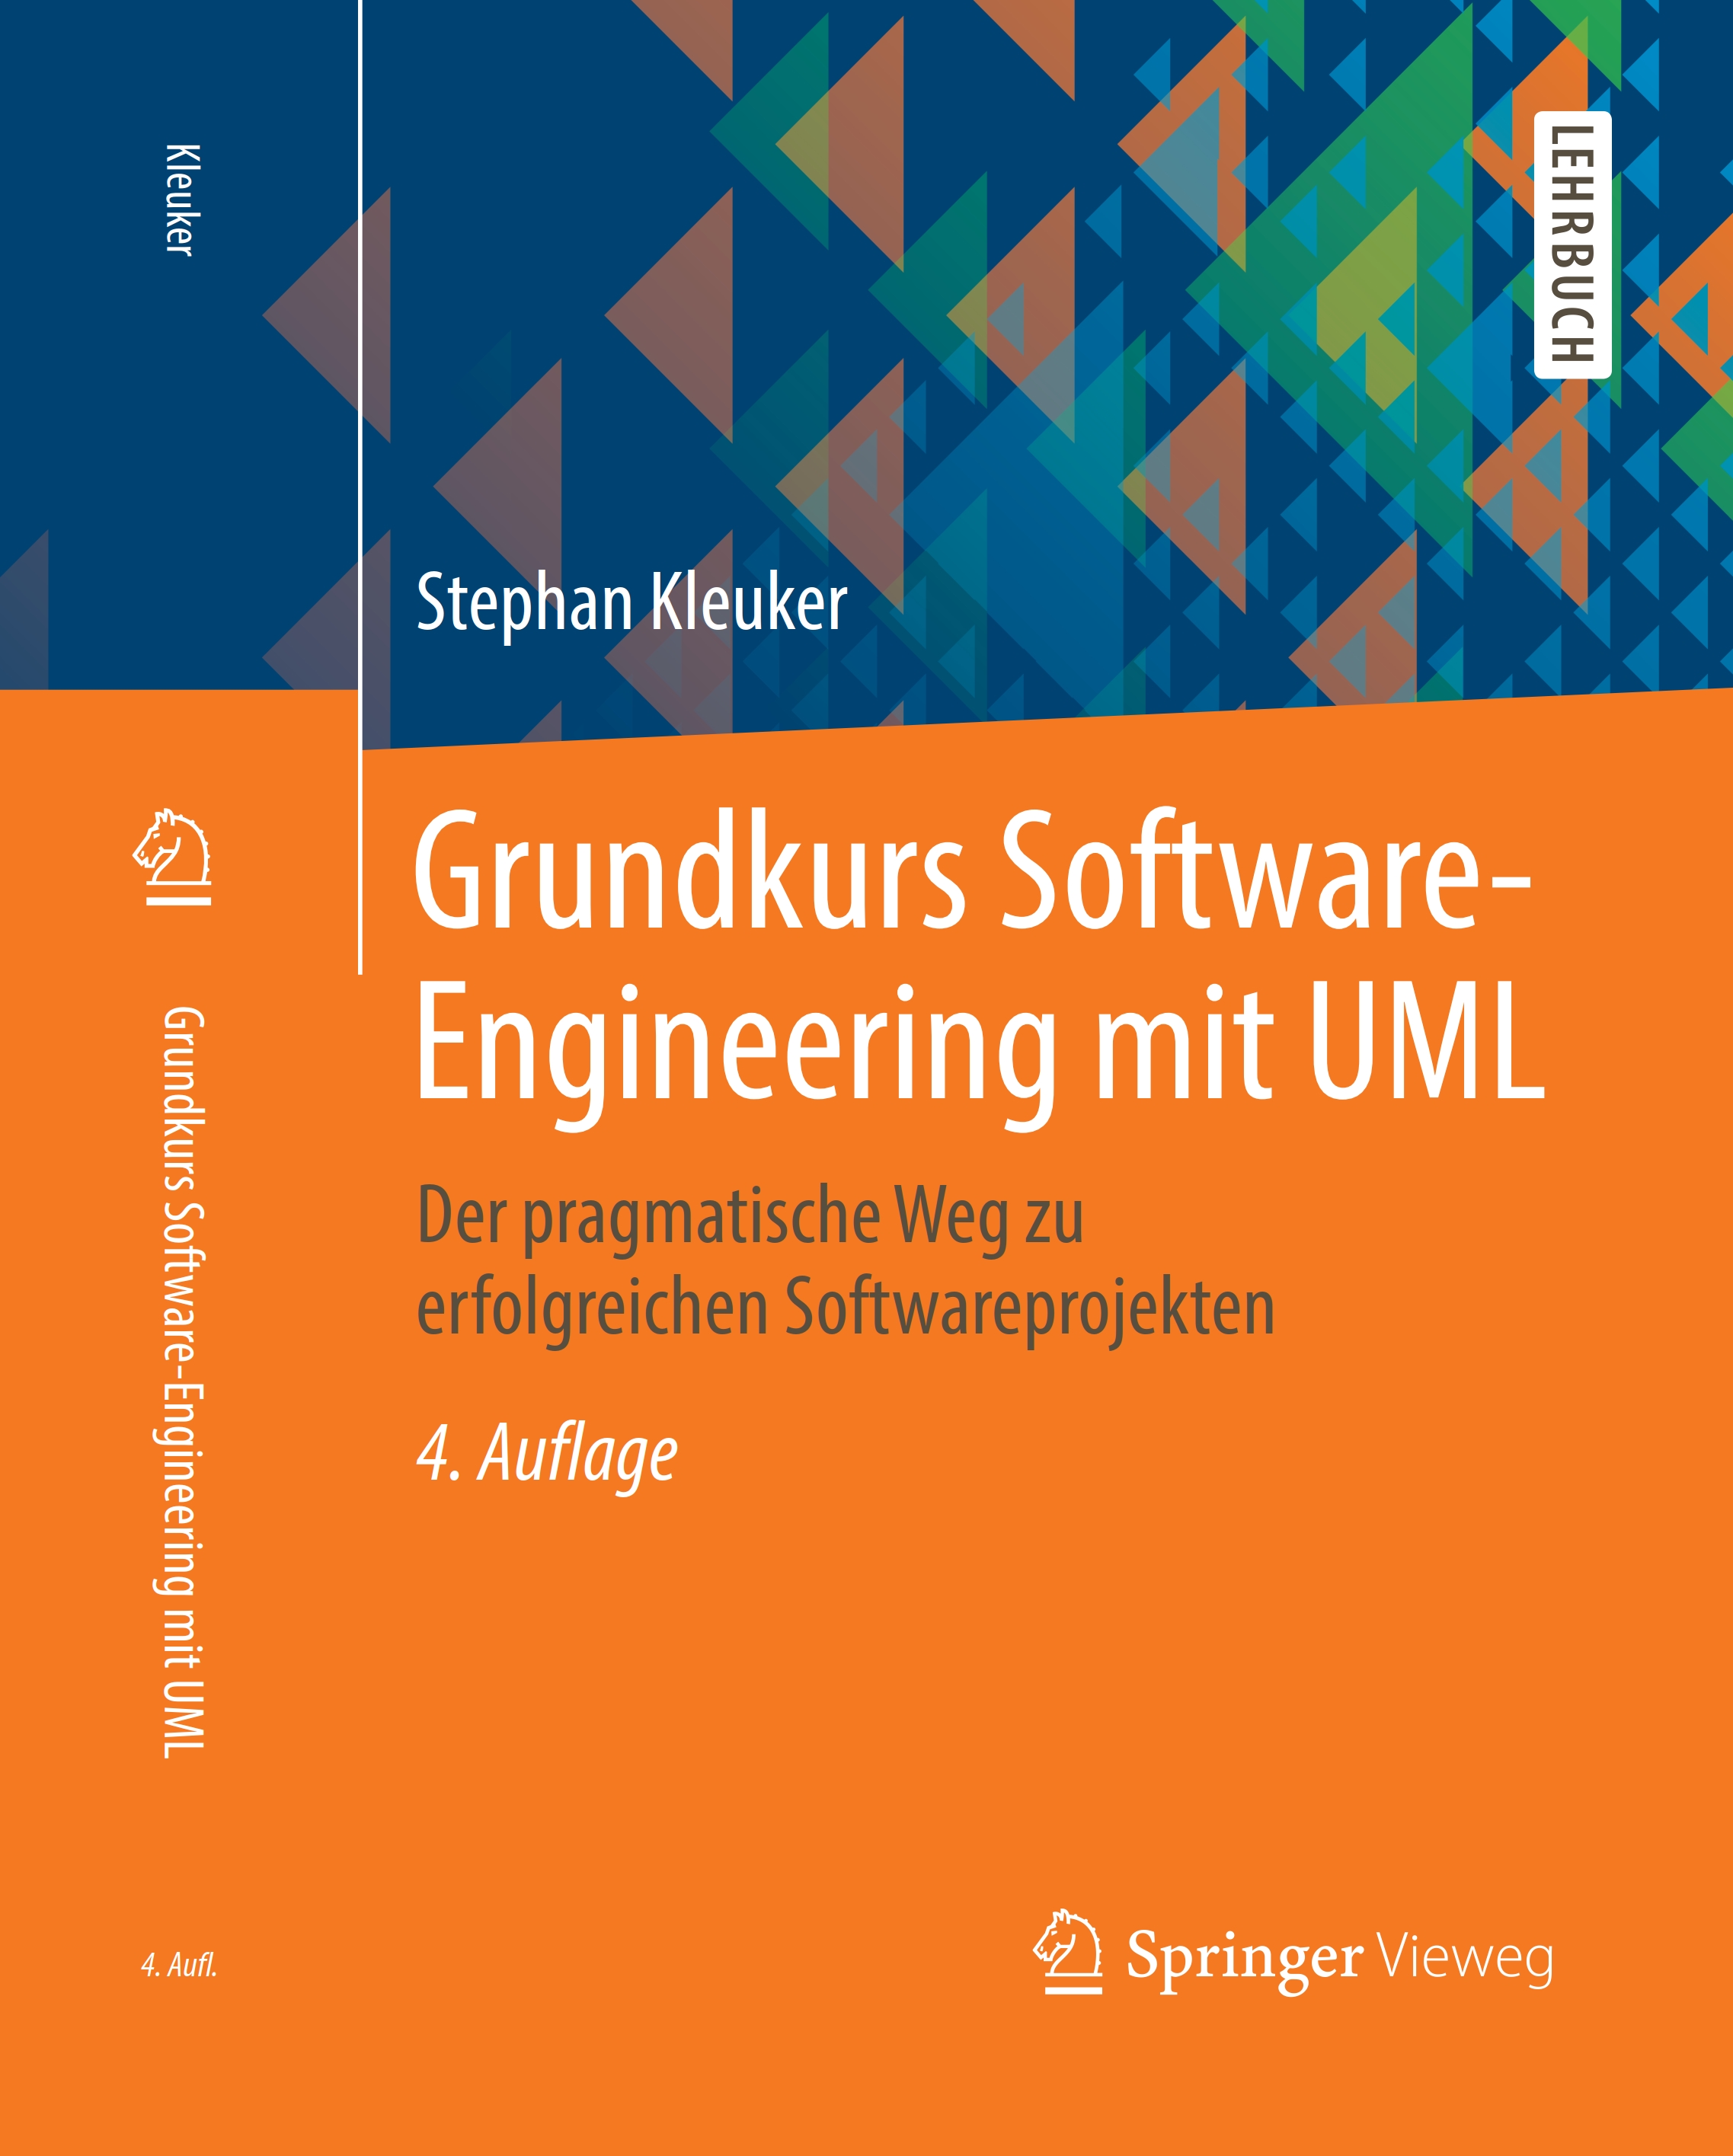 Cover des Software-Engineering-Buches